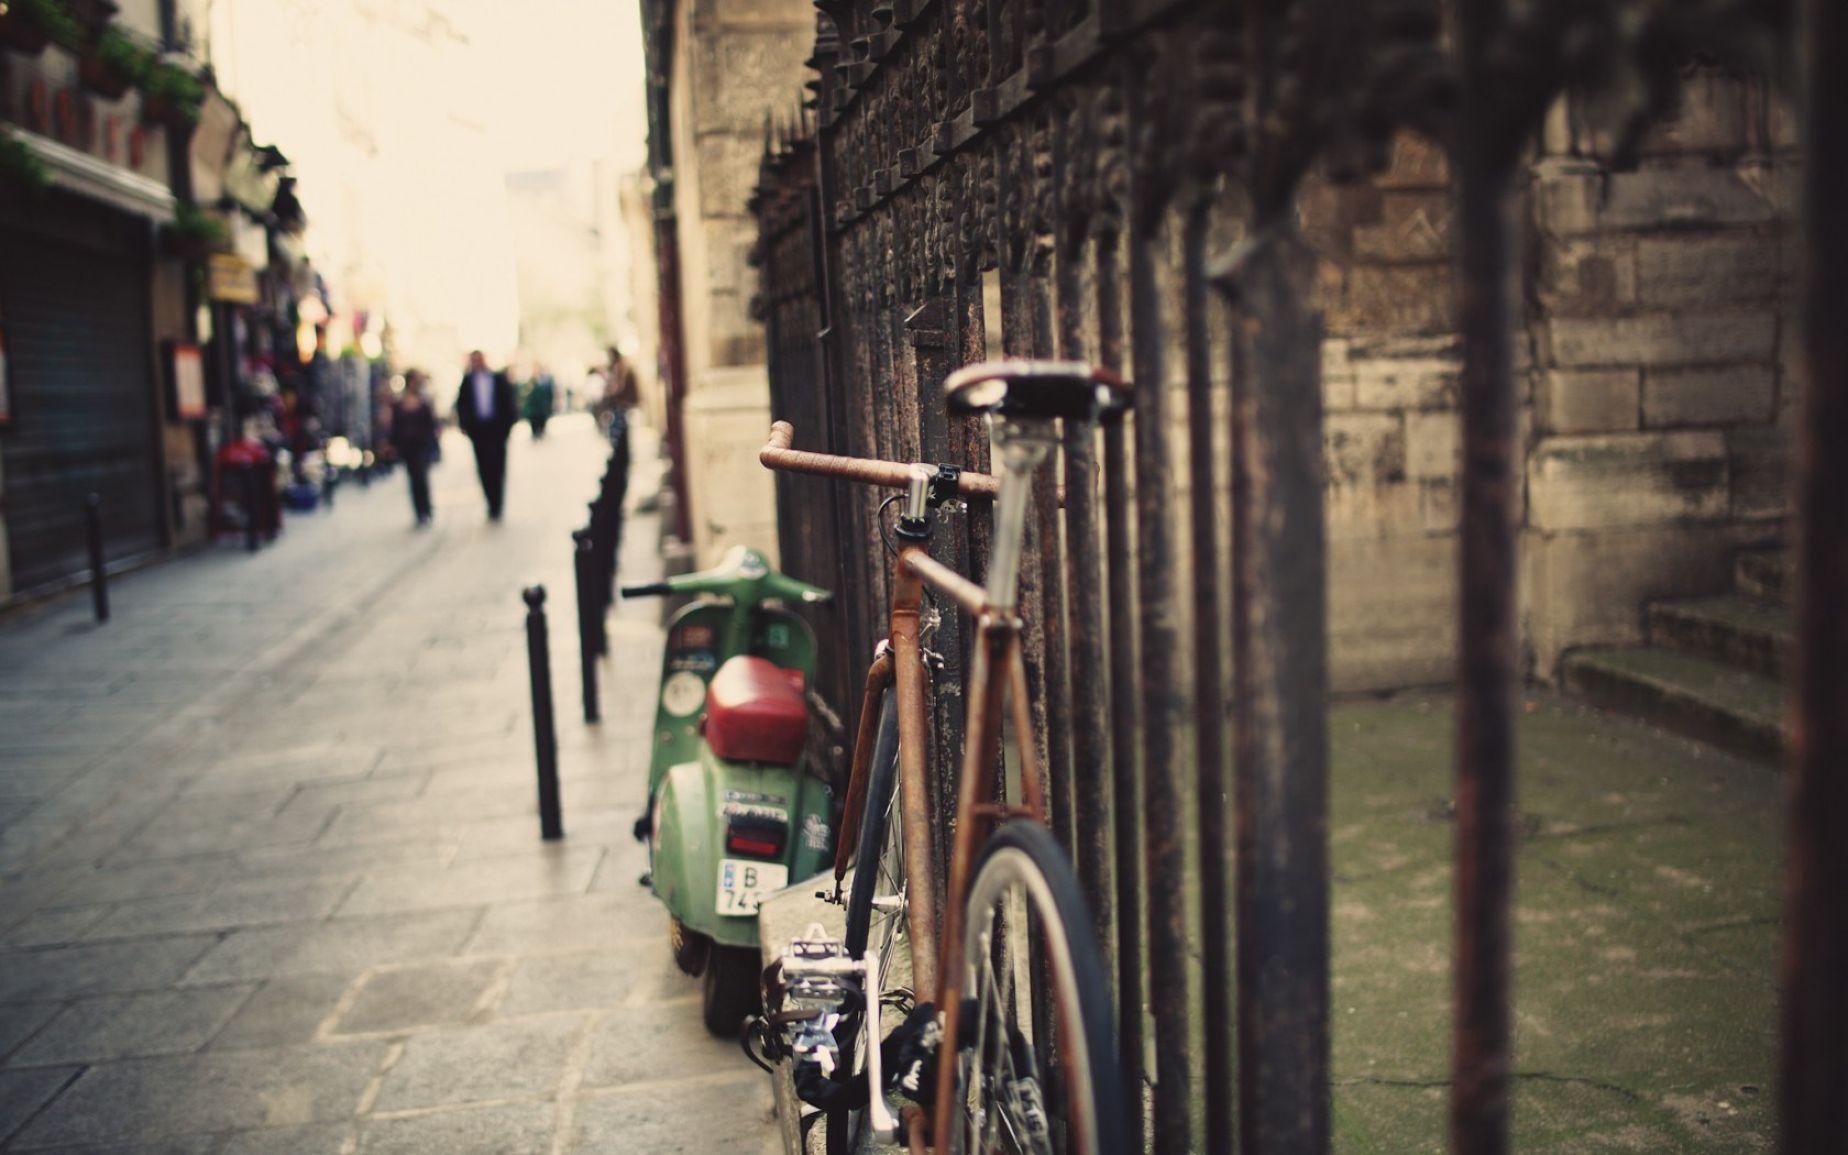 Vintage City Photography Bicycle Wallpaper: Desktop HD Wallpaper Free Image, Picture, Photo on DailyHDWallpaper.com